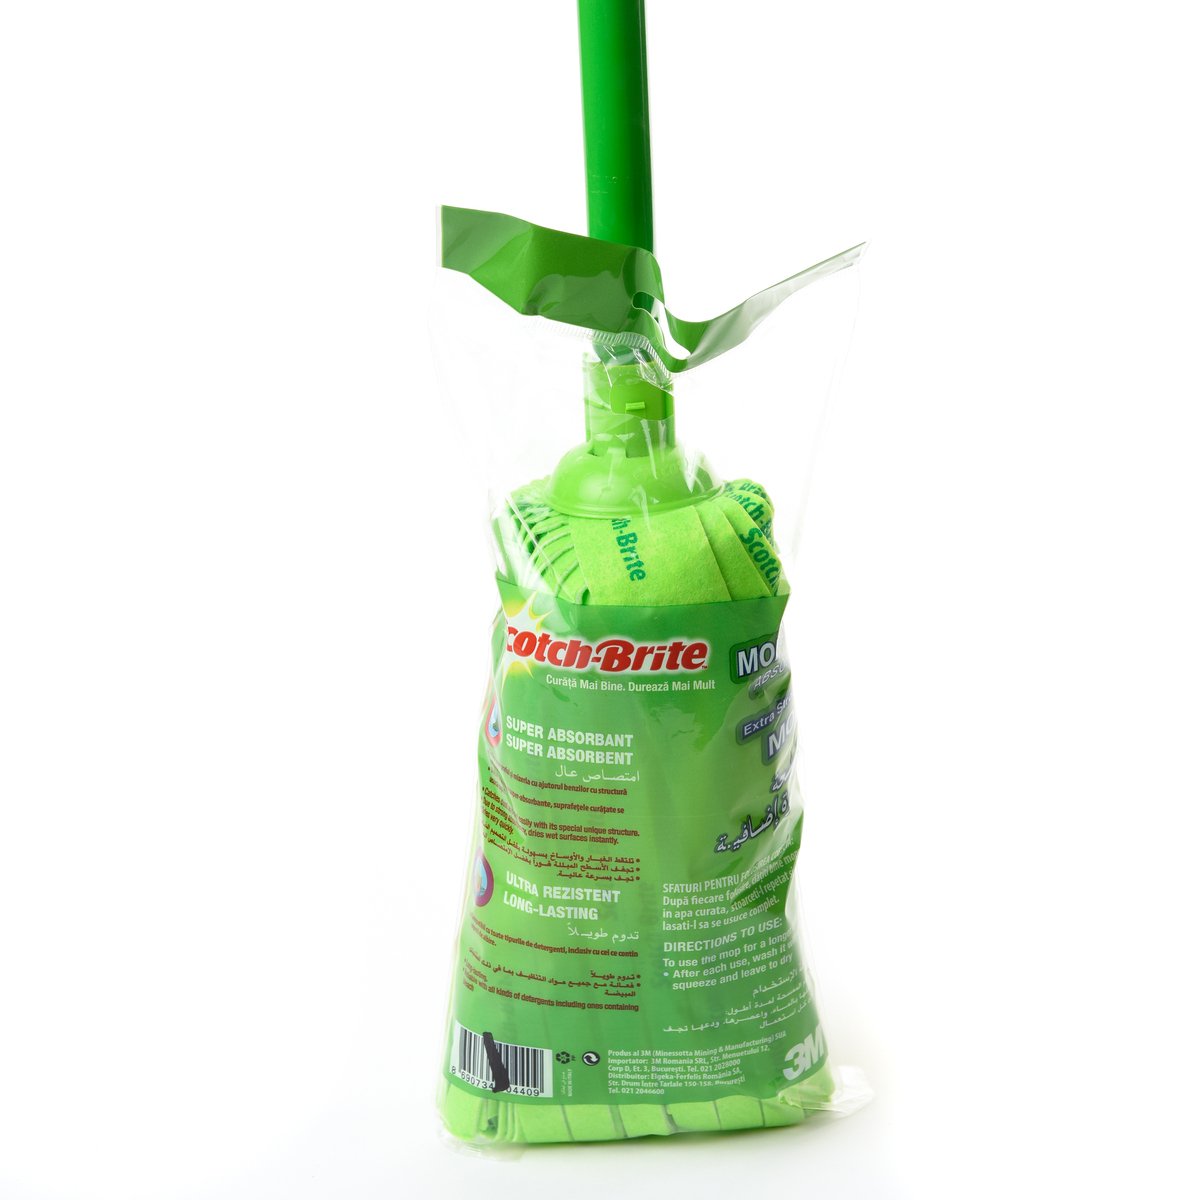 Buy Scotch Brite Twister Mop 1 Pc Online At Best Price of Rs 599